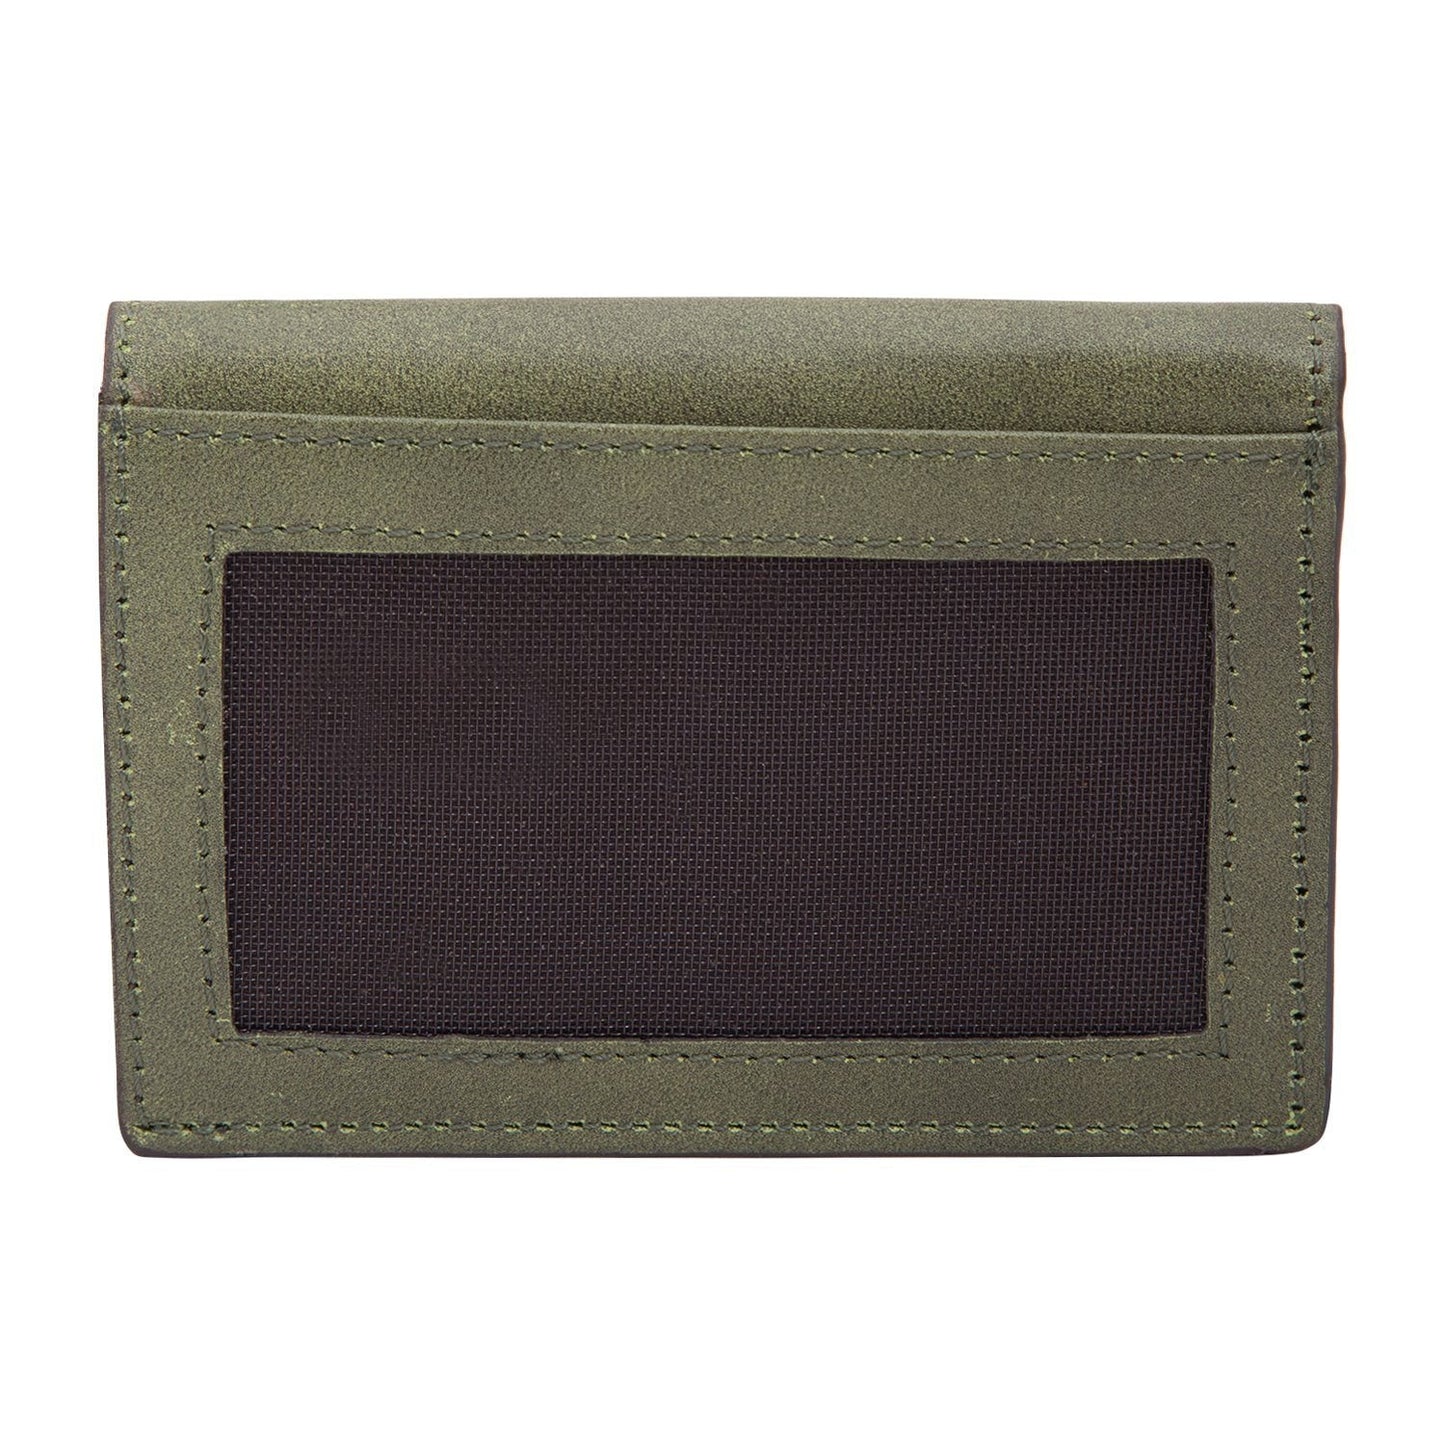 Olive Colour Bi-Fold Italian Leather Slim Wallet/Card Holder (9 Card Slot + 3 Hidden Compartment + 1 ID Slot + Cash Compartment) Cathy London 